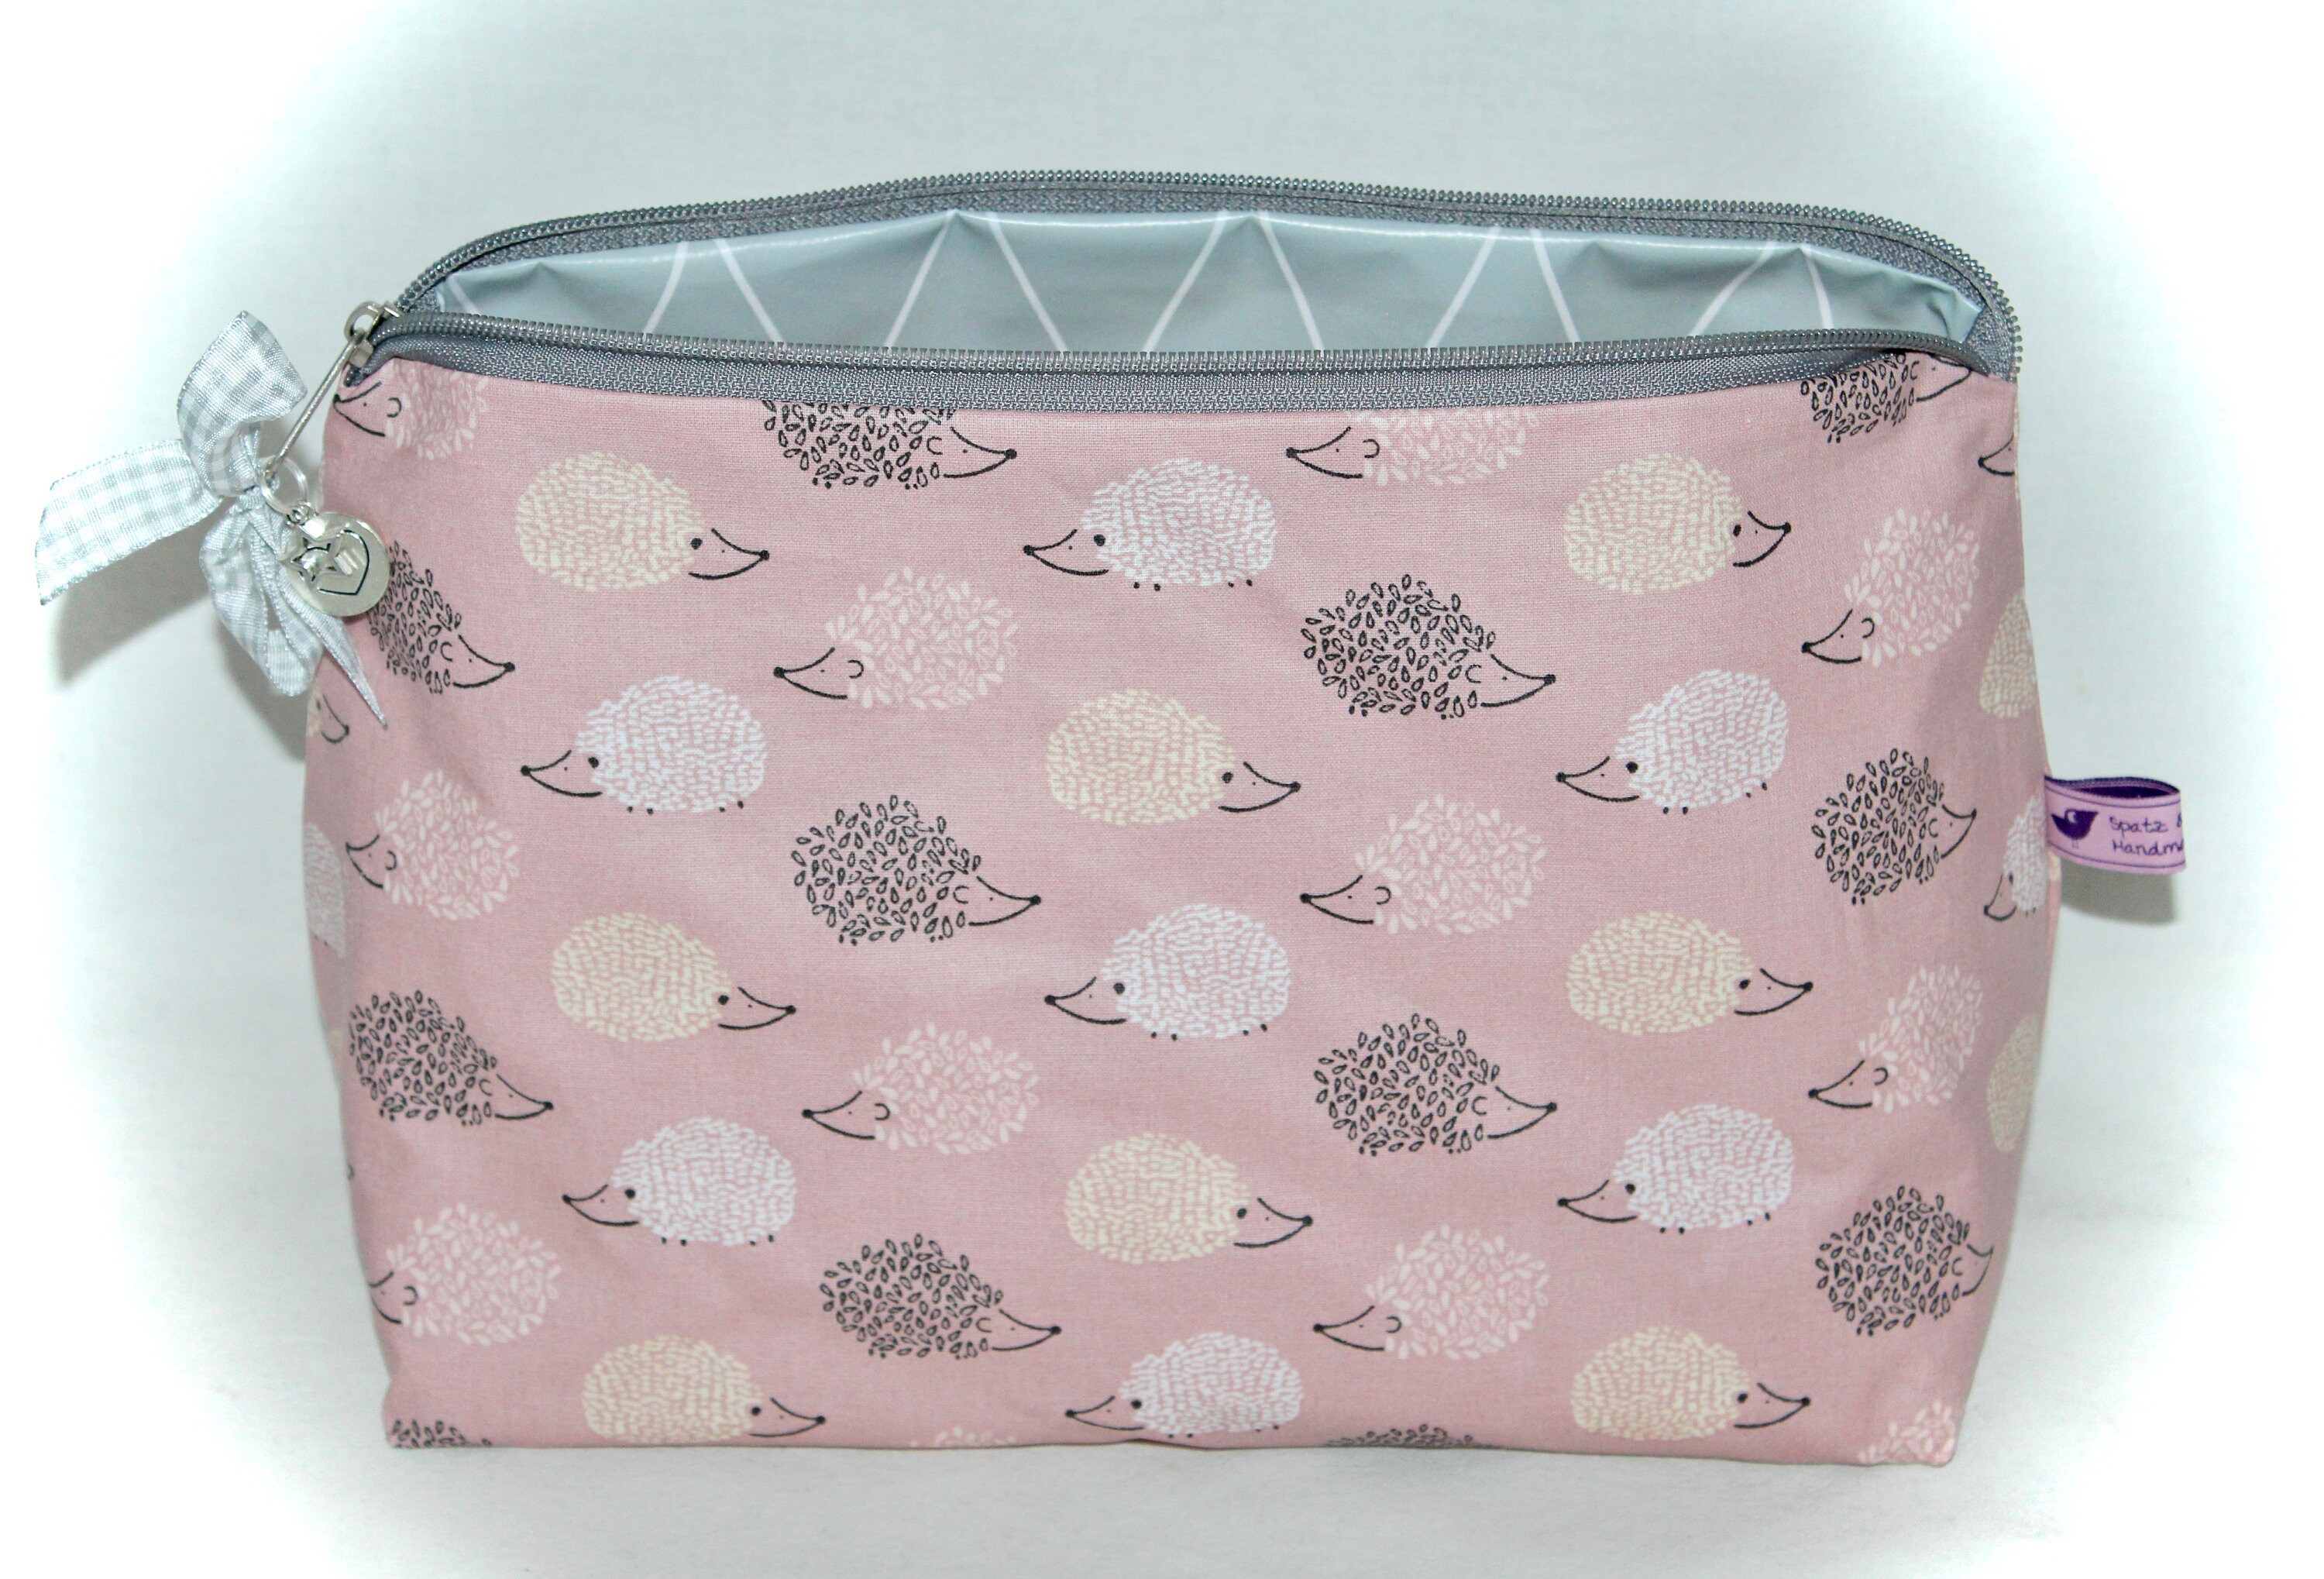 Cute Toiletry Bag in Pink and Grey With Hedgehogs -  Norway